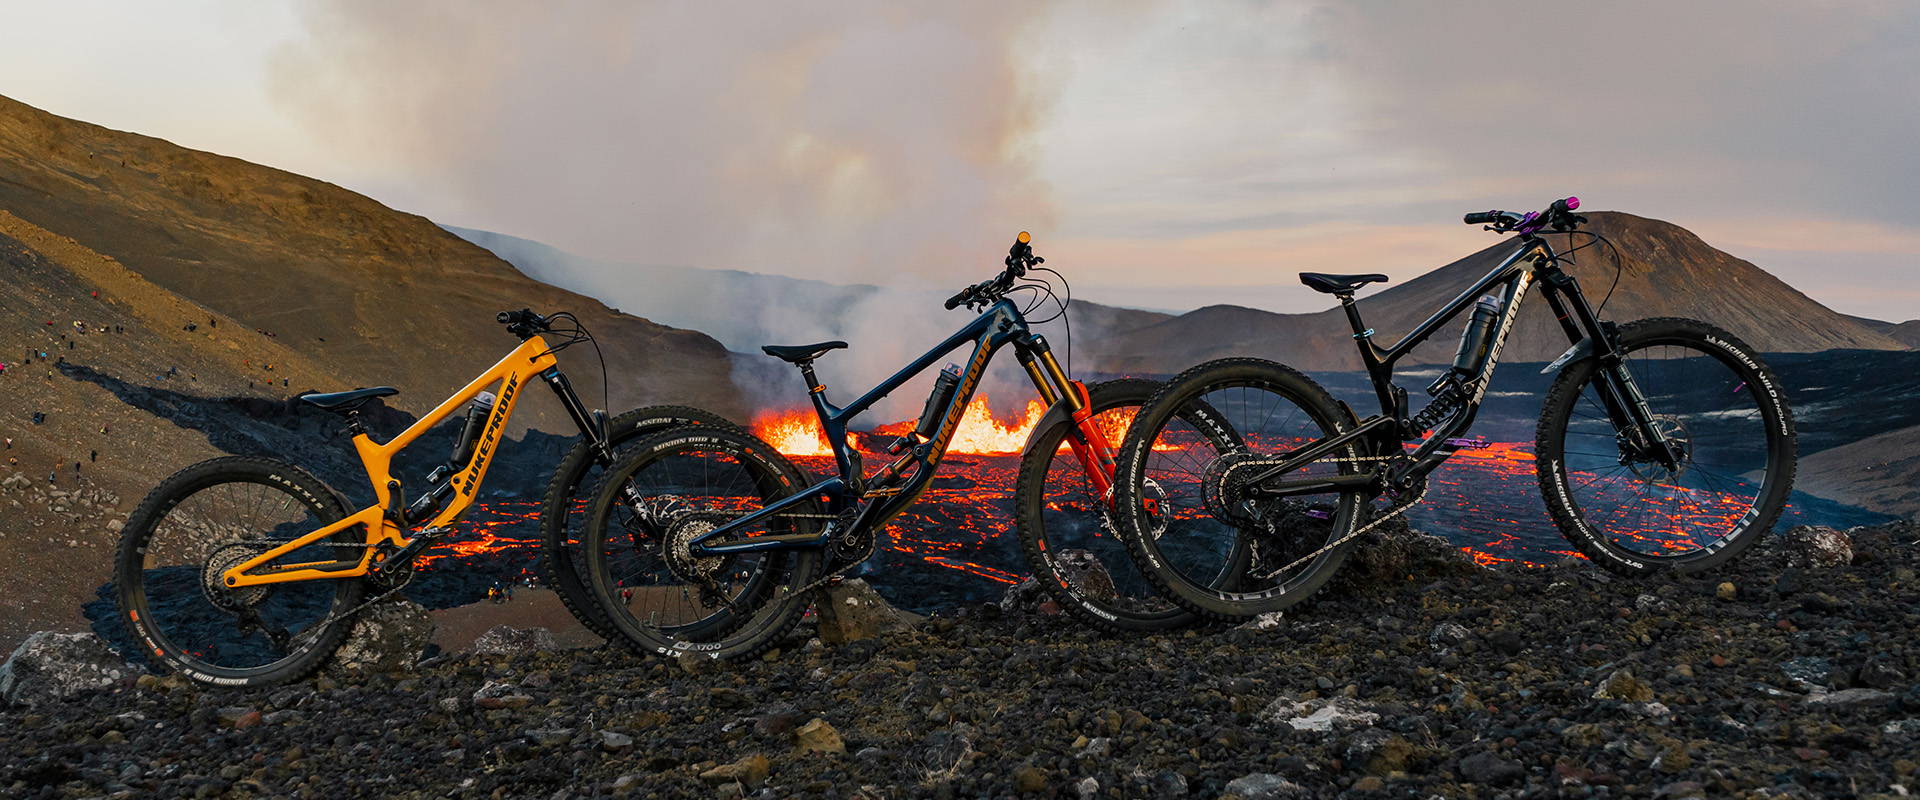 The Nukeproof Giga lineup in Iceland